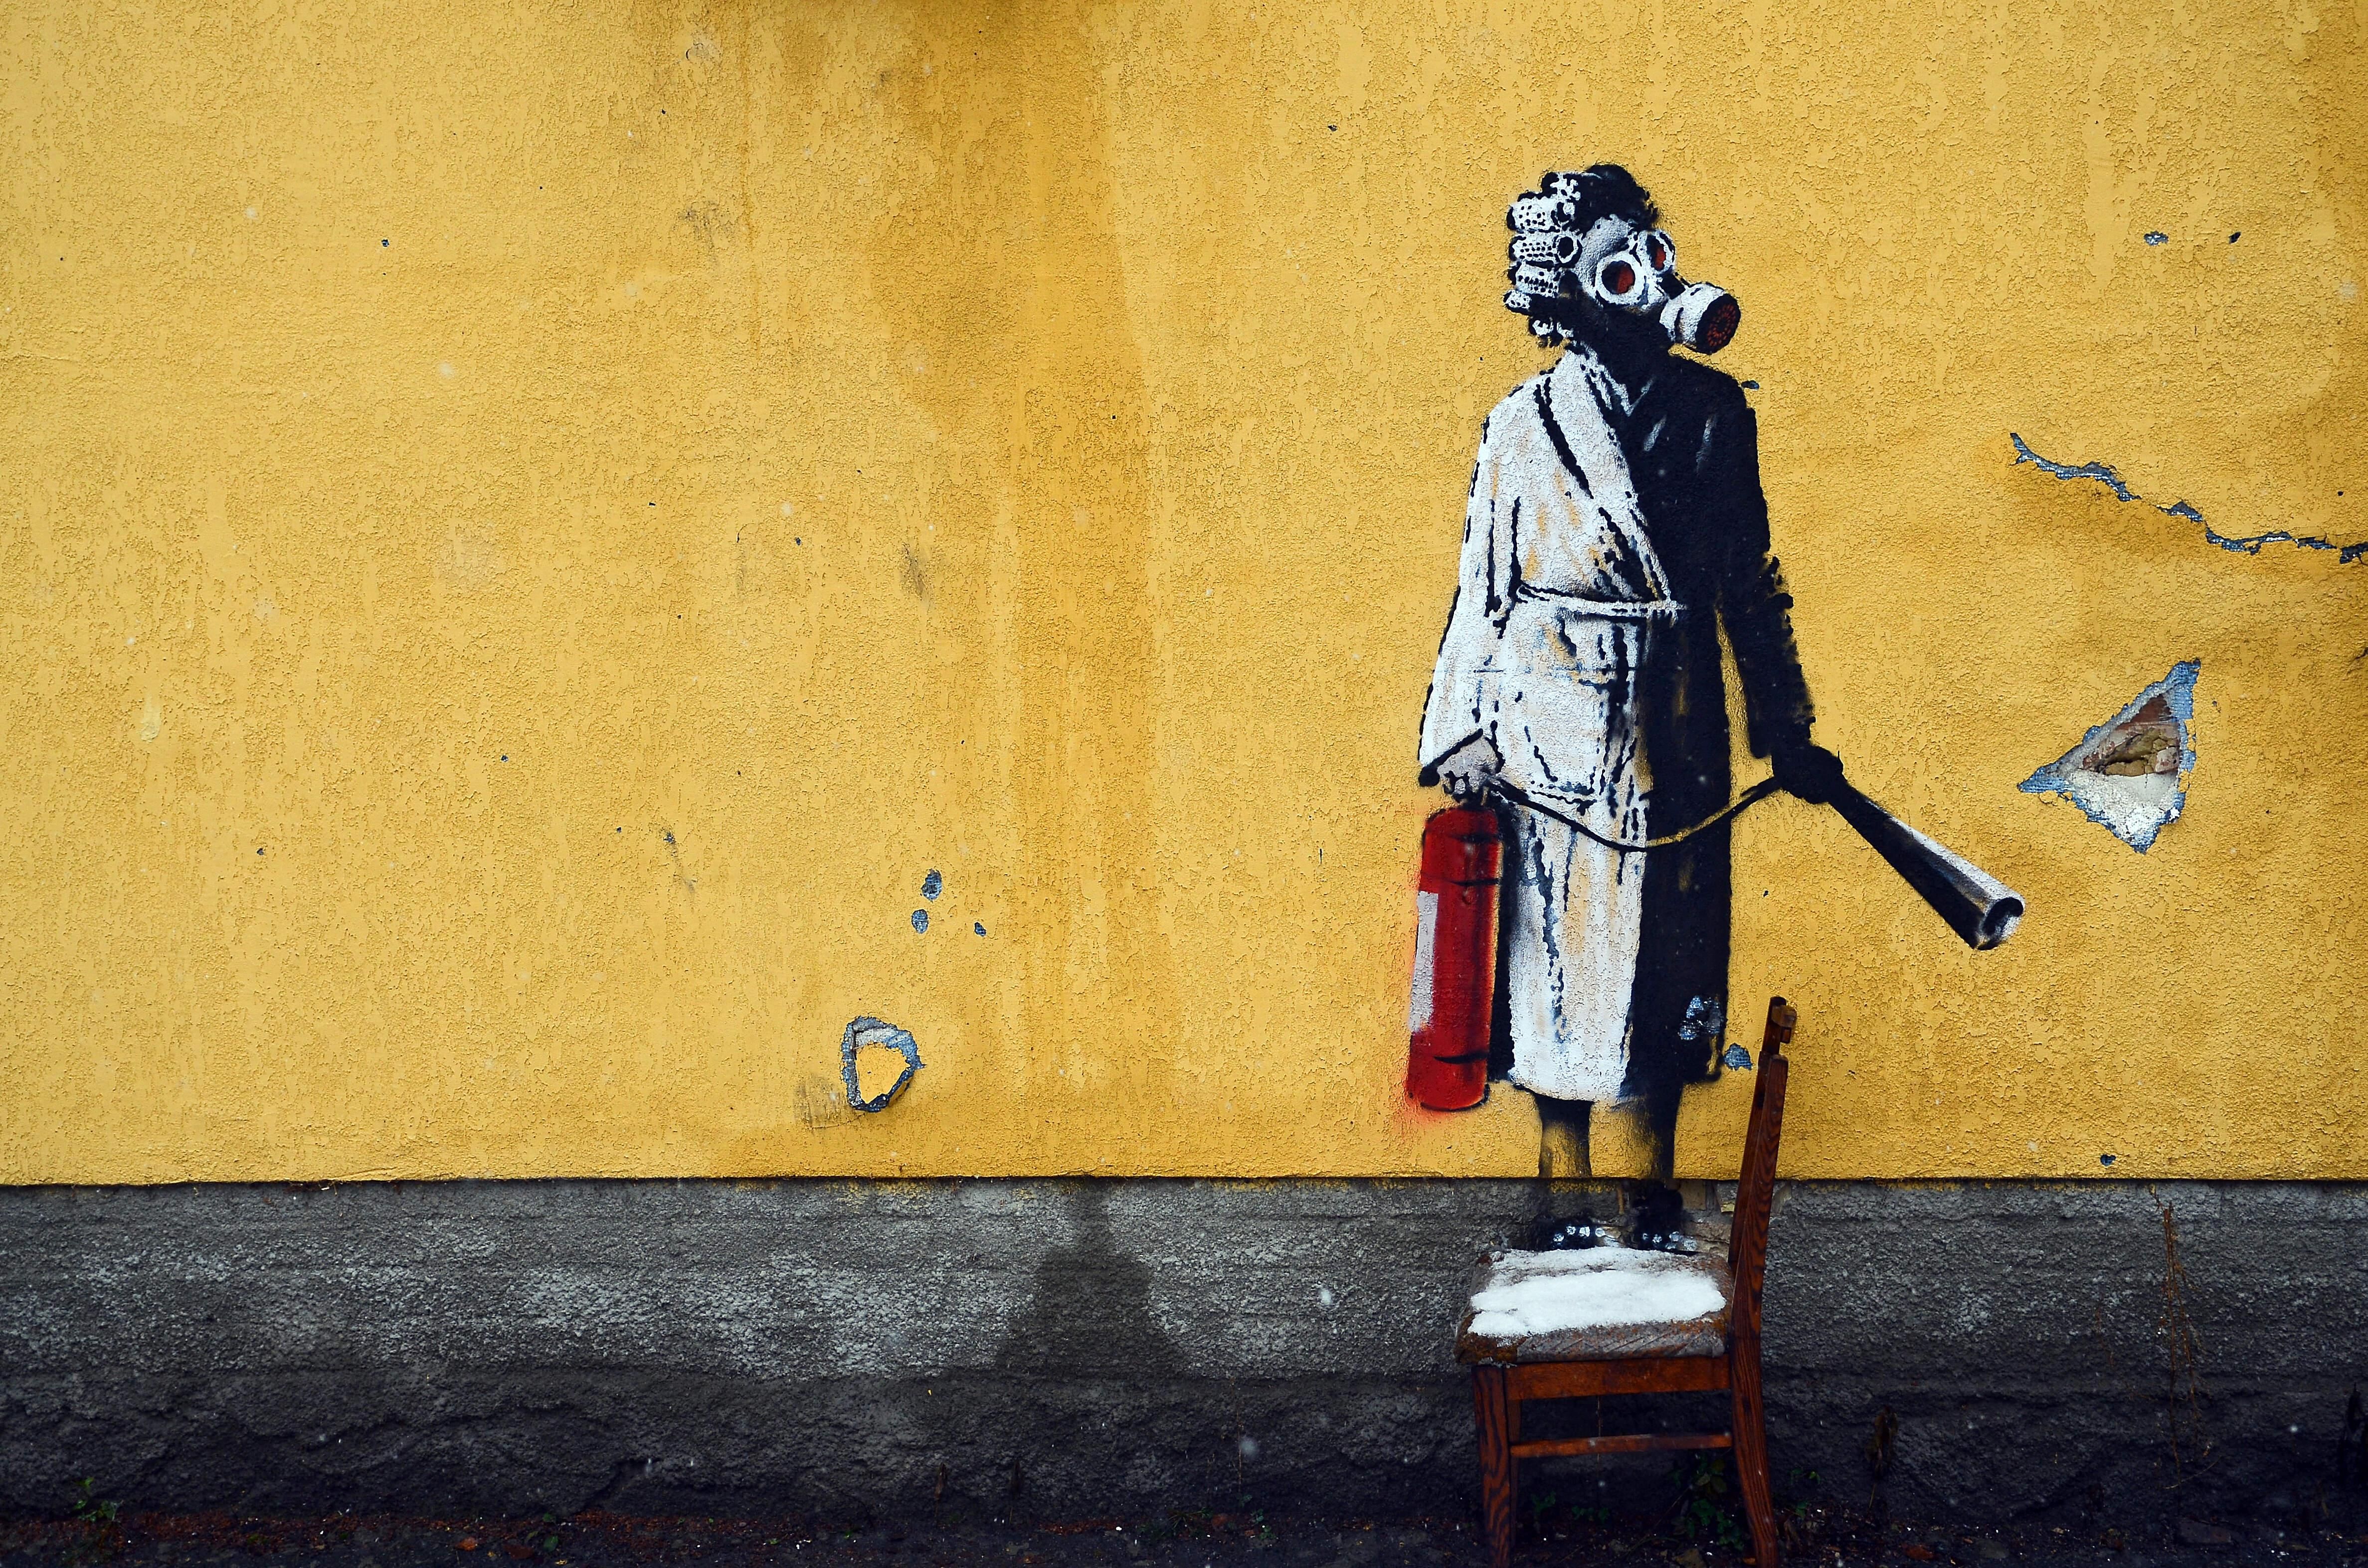 Banksy mural depicts a woman in a gas mask standing on a chair and holding a fire extinguisher in Hostomel, Ukraine.